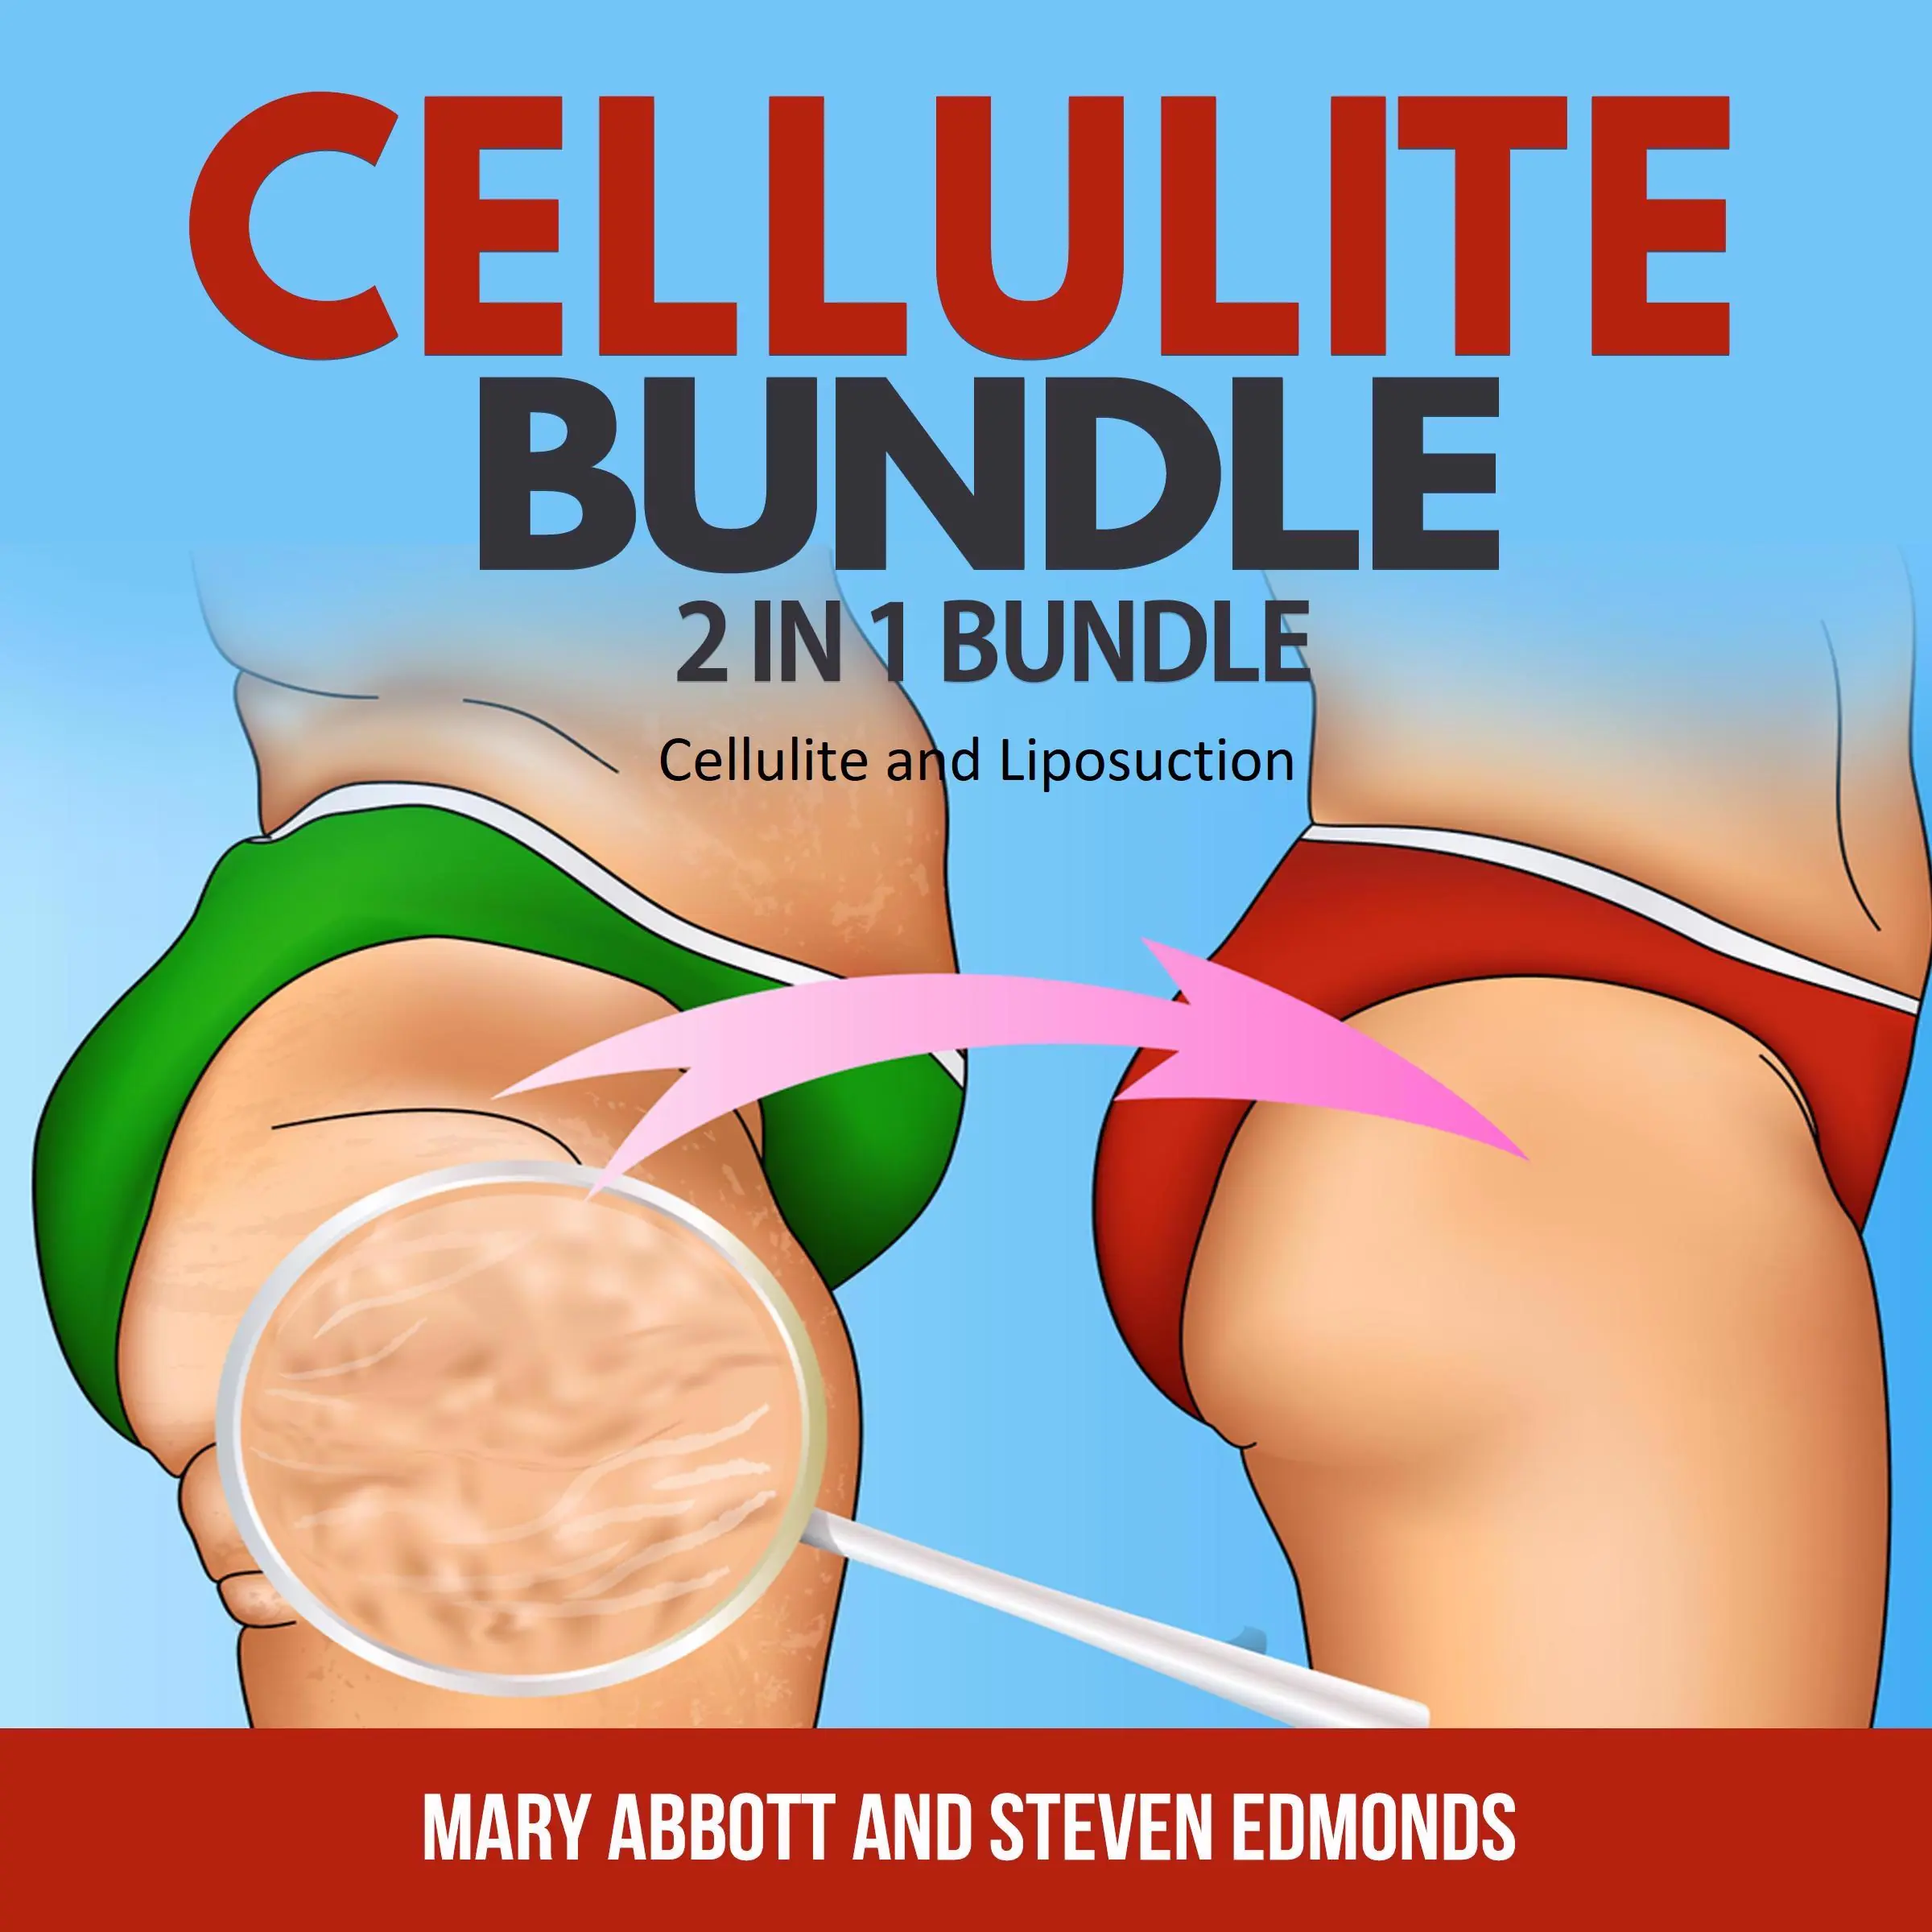 Cellulite Bundle: 2 in 1 Bundle, Cellulite, Liposuction Audiobook by Mary Abbott and Steven Edmonds